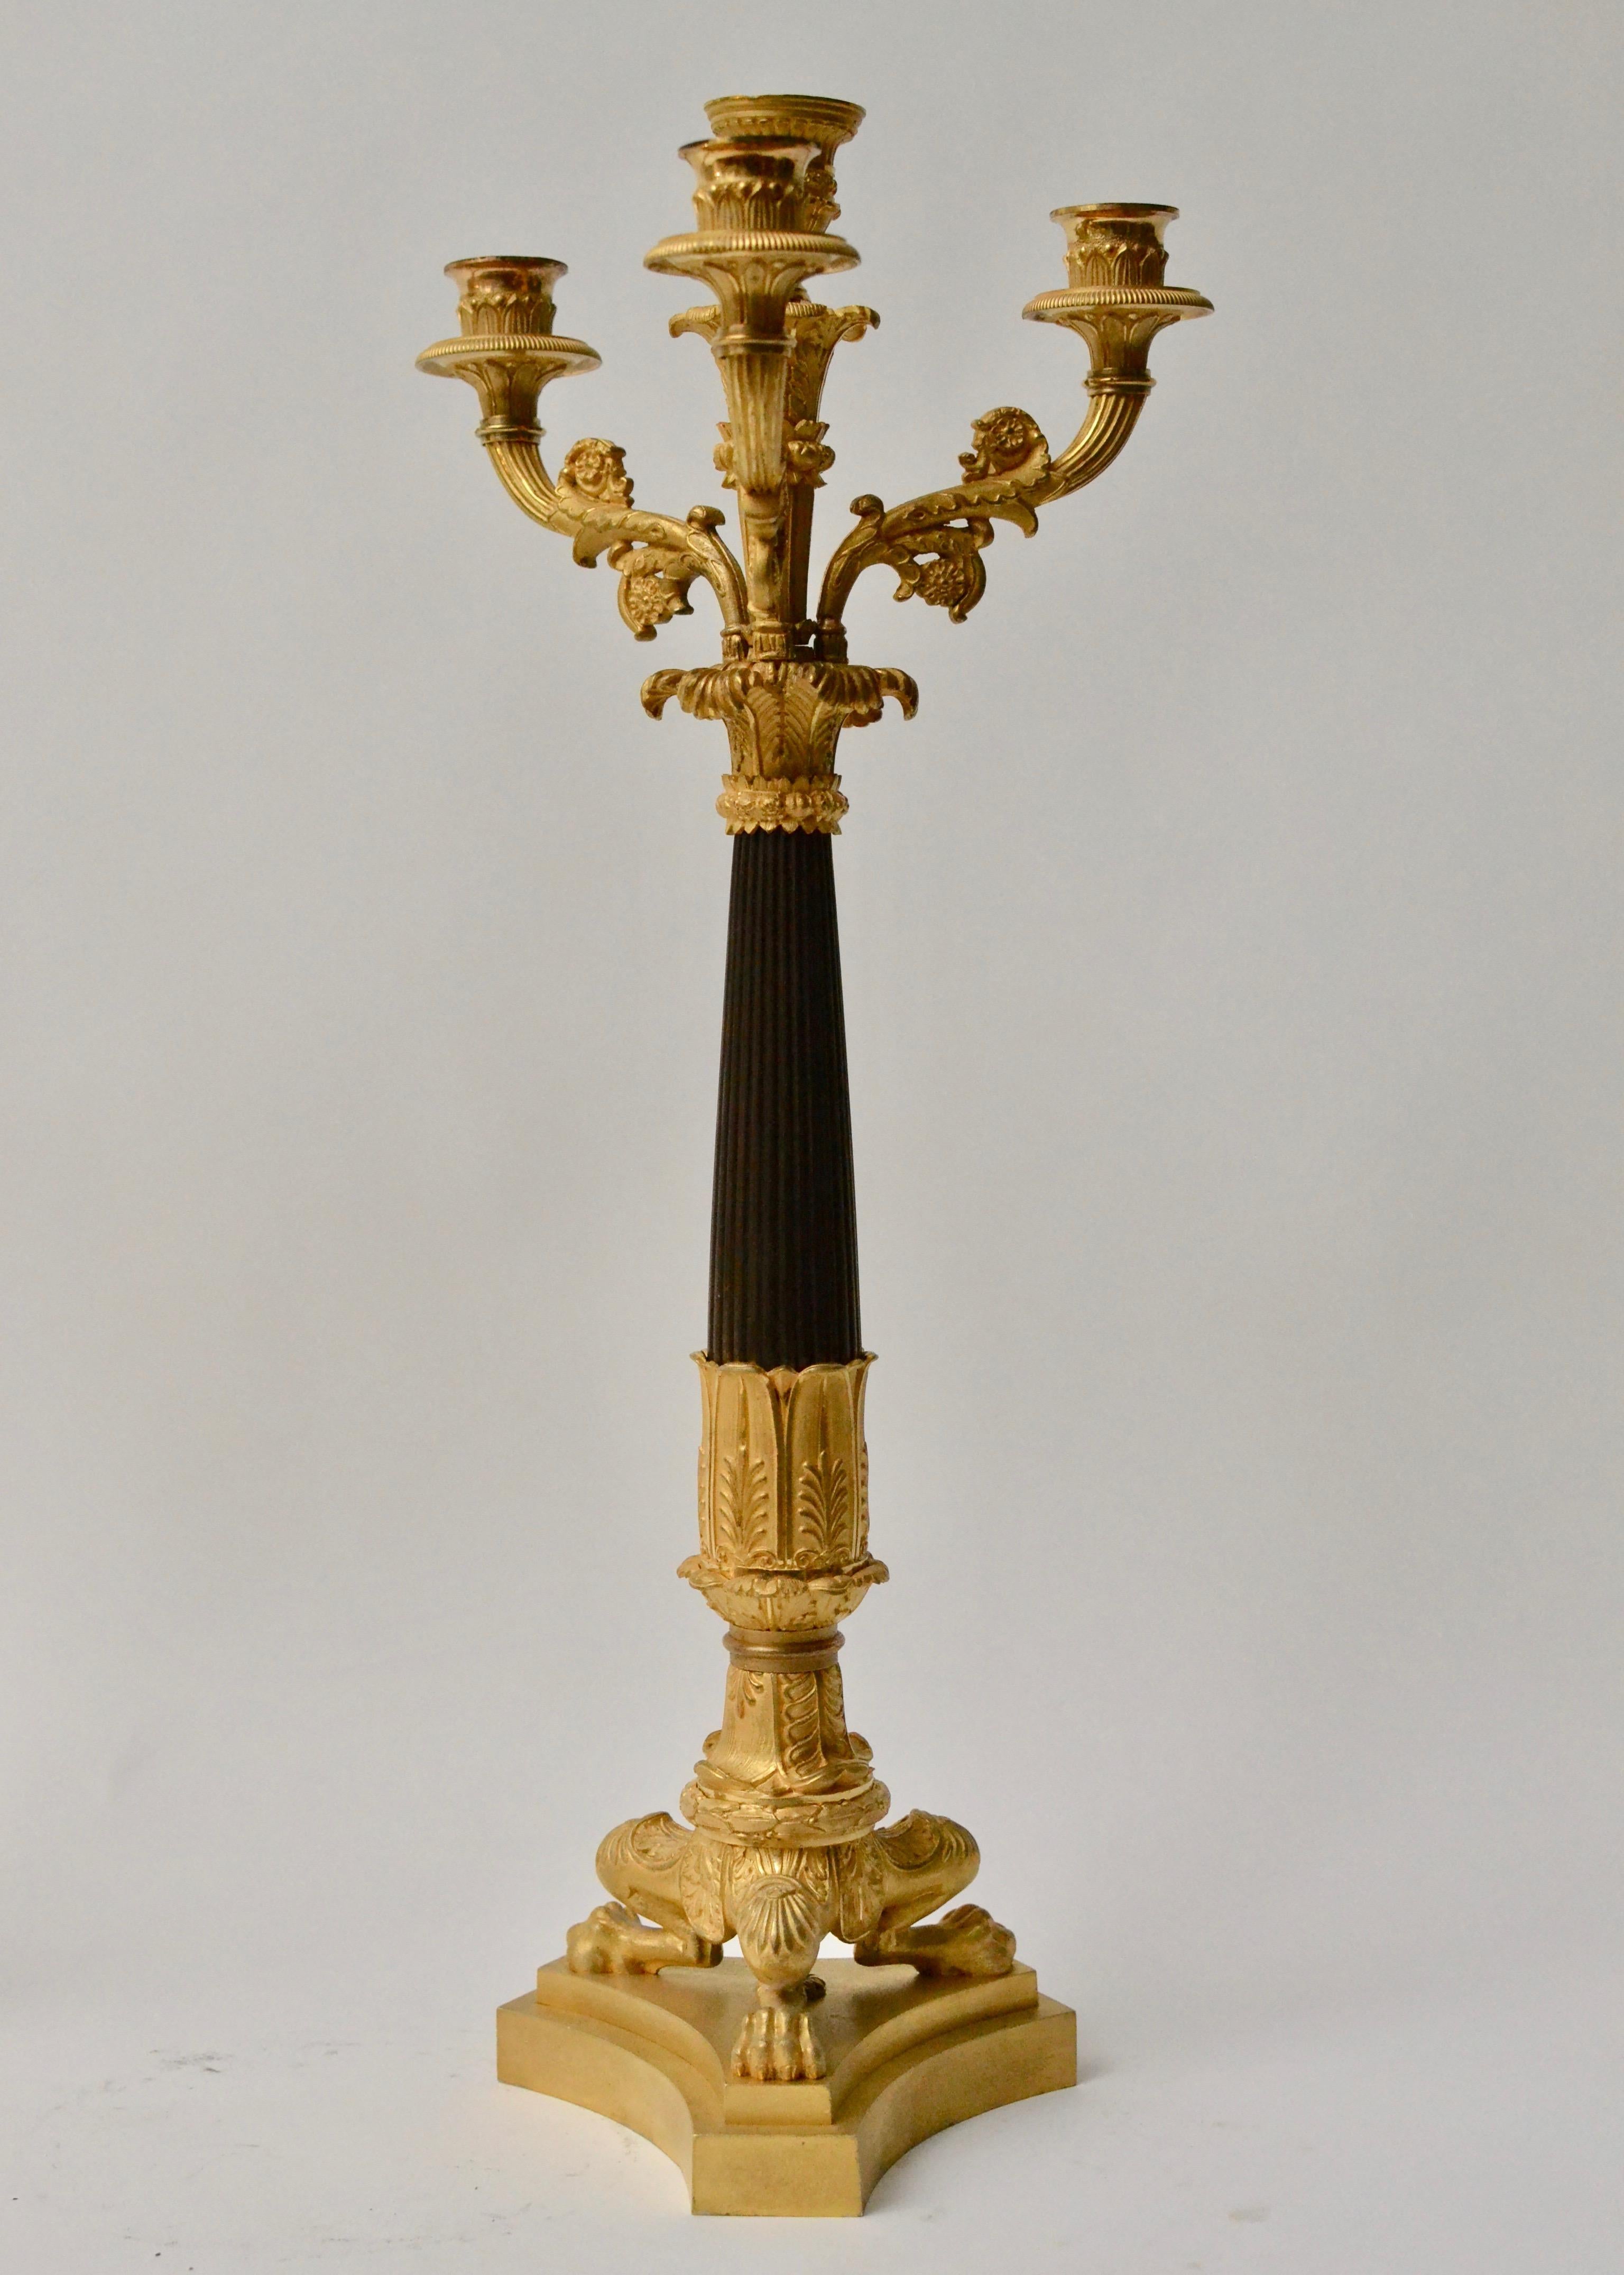 A pair of gilt and patinated empire candelabra, French, circa 1825.